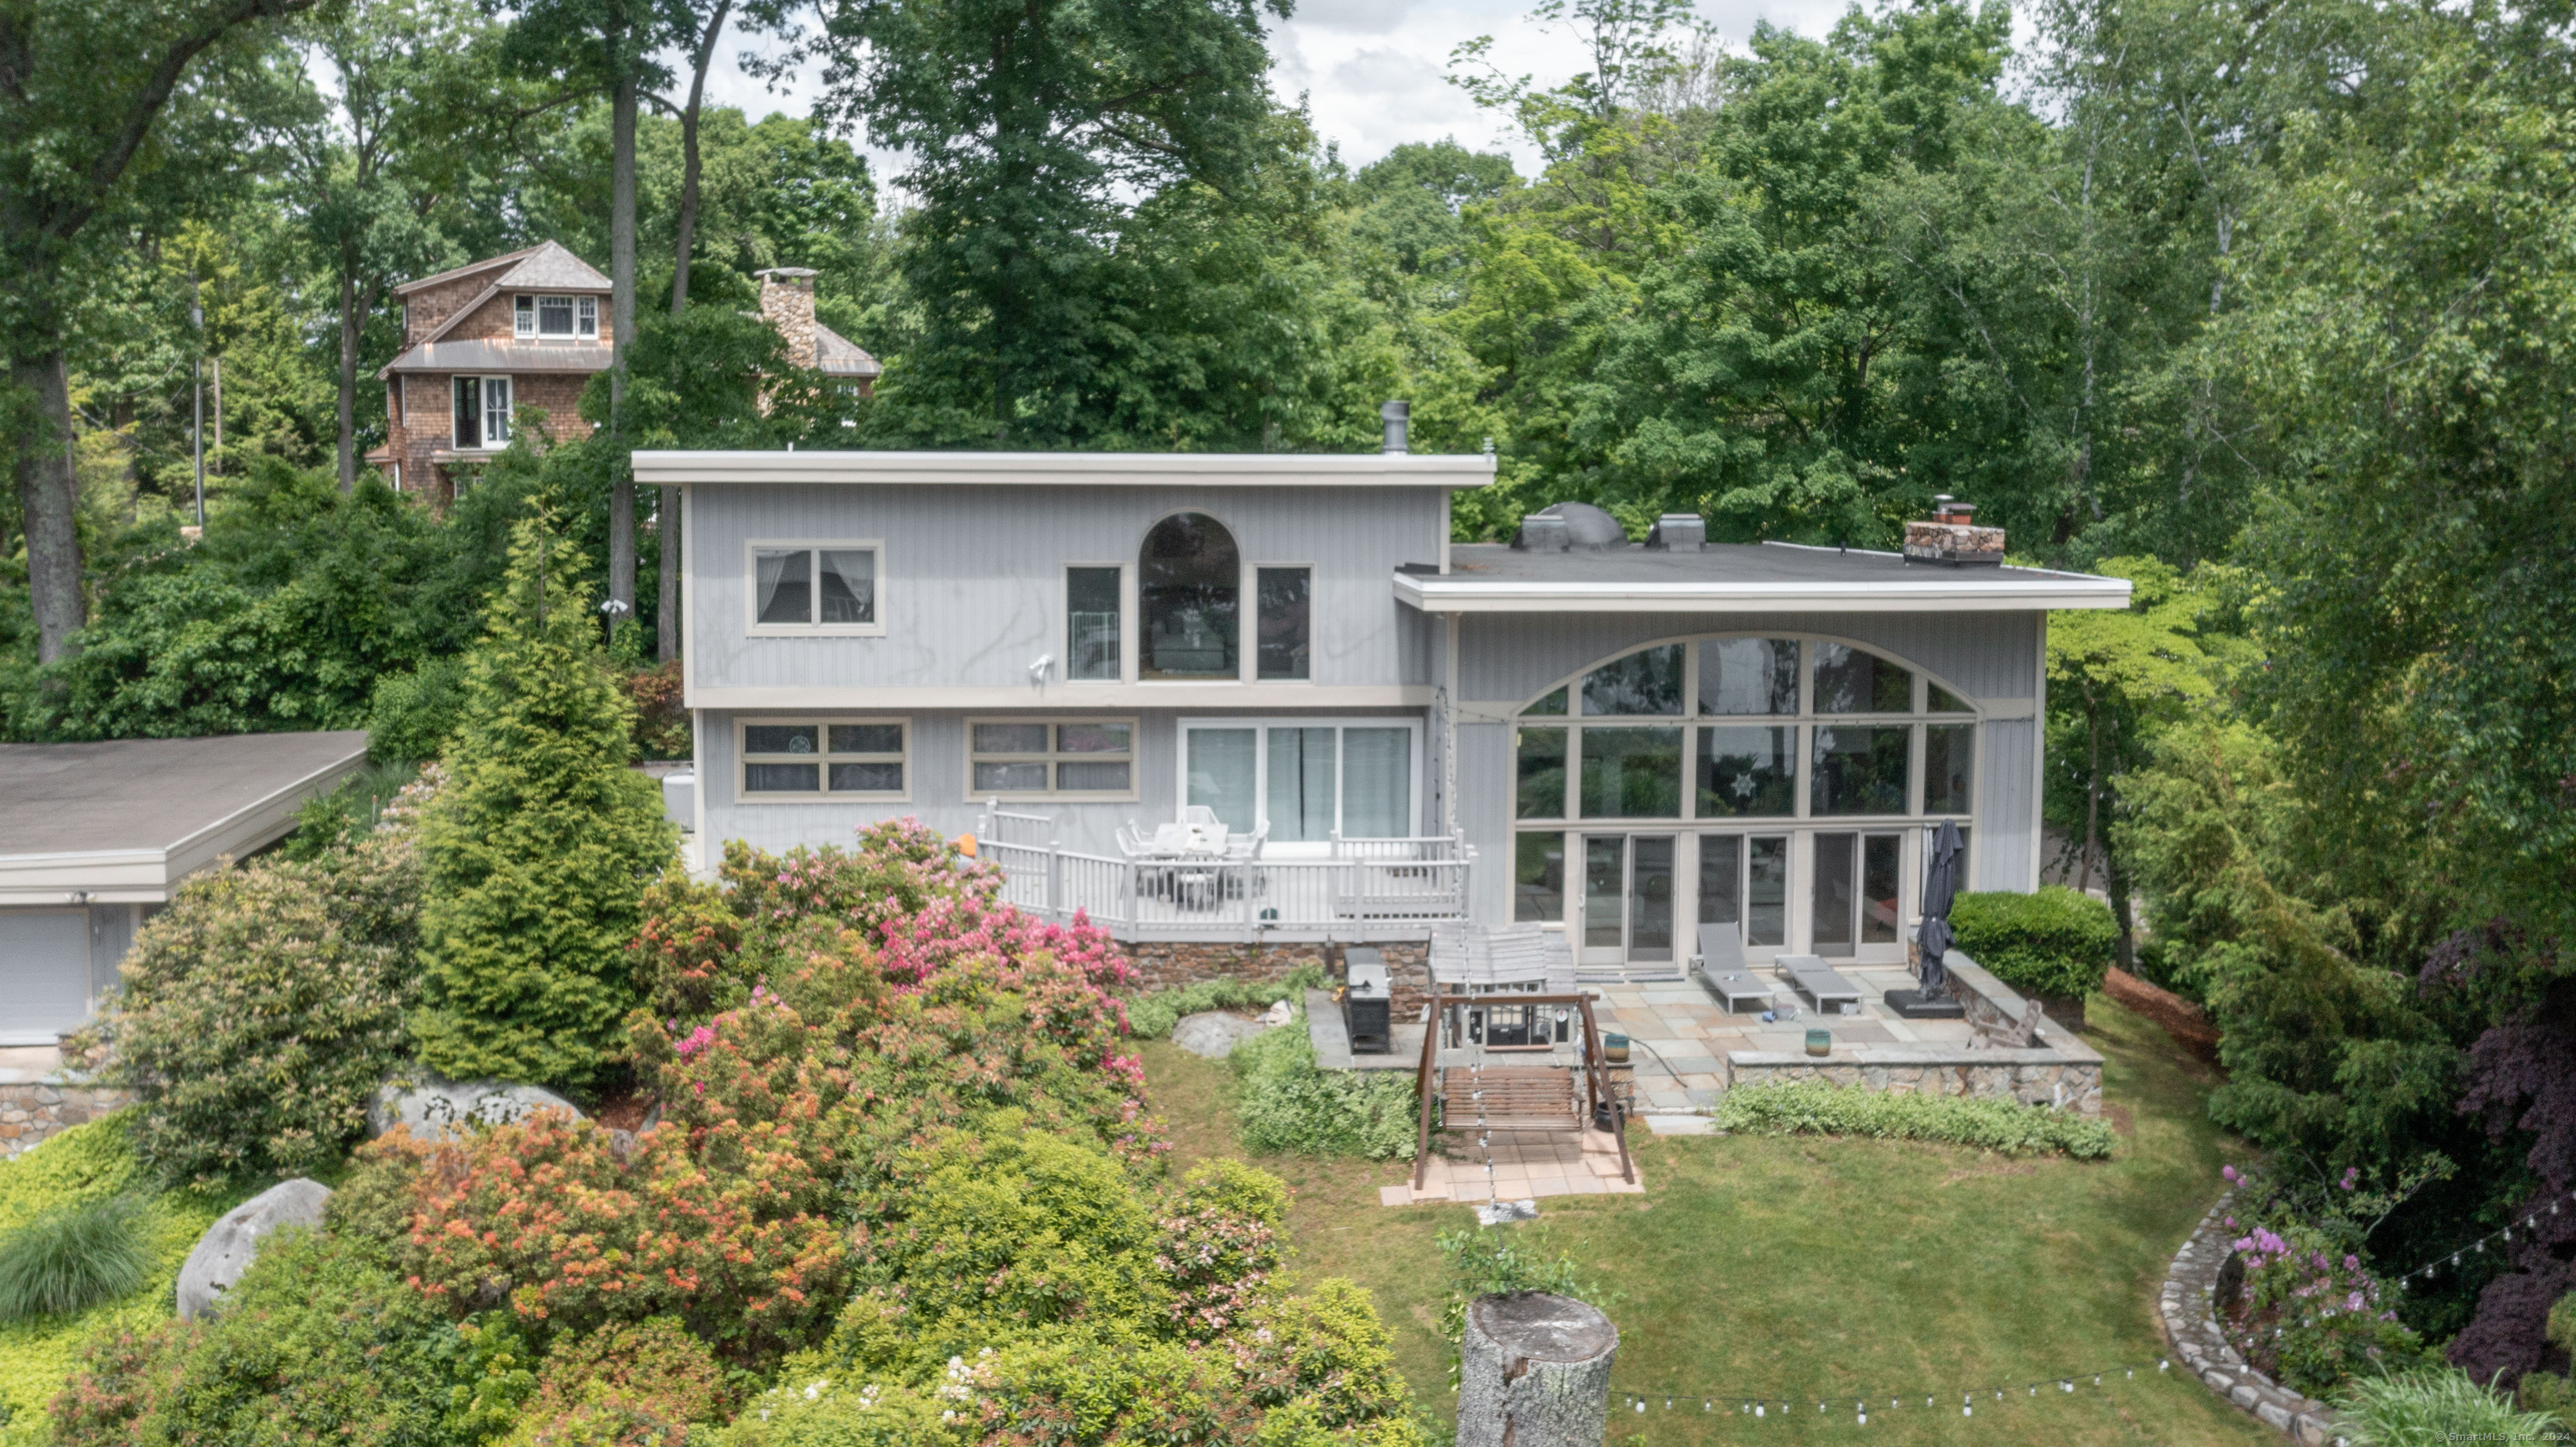 Rental Property at 10 Oak Point Club, New Milford, Connecticut - Bedrooms: 4 
Bathrooms: 4 
Rooms: 9  - $25,000 MO.